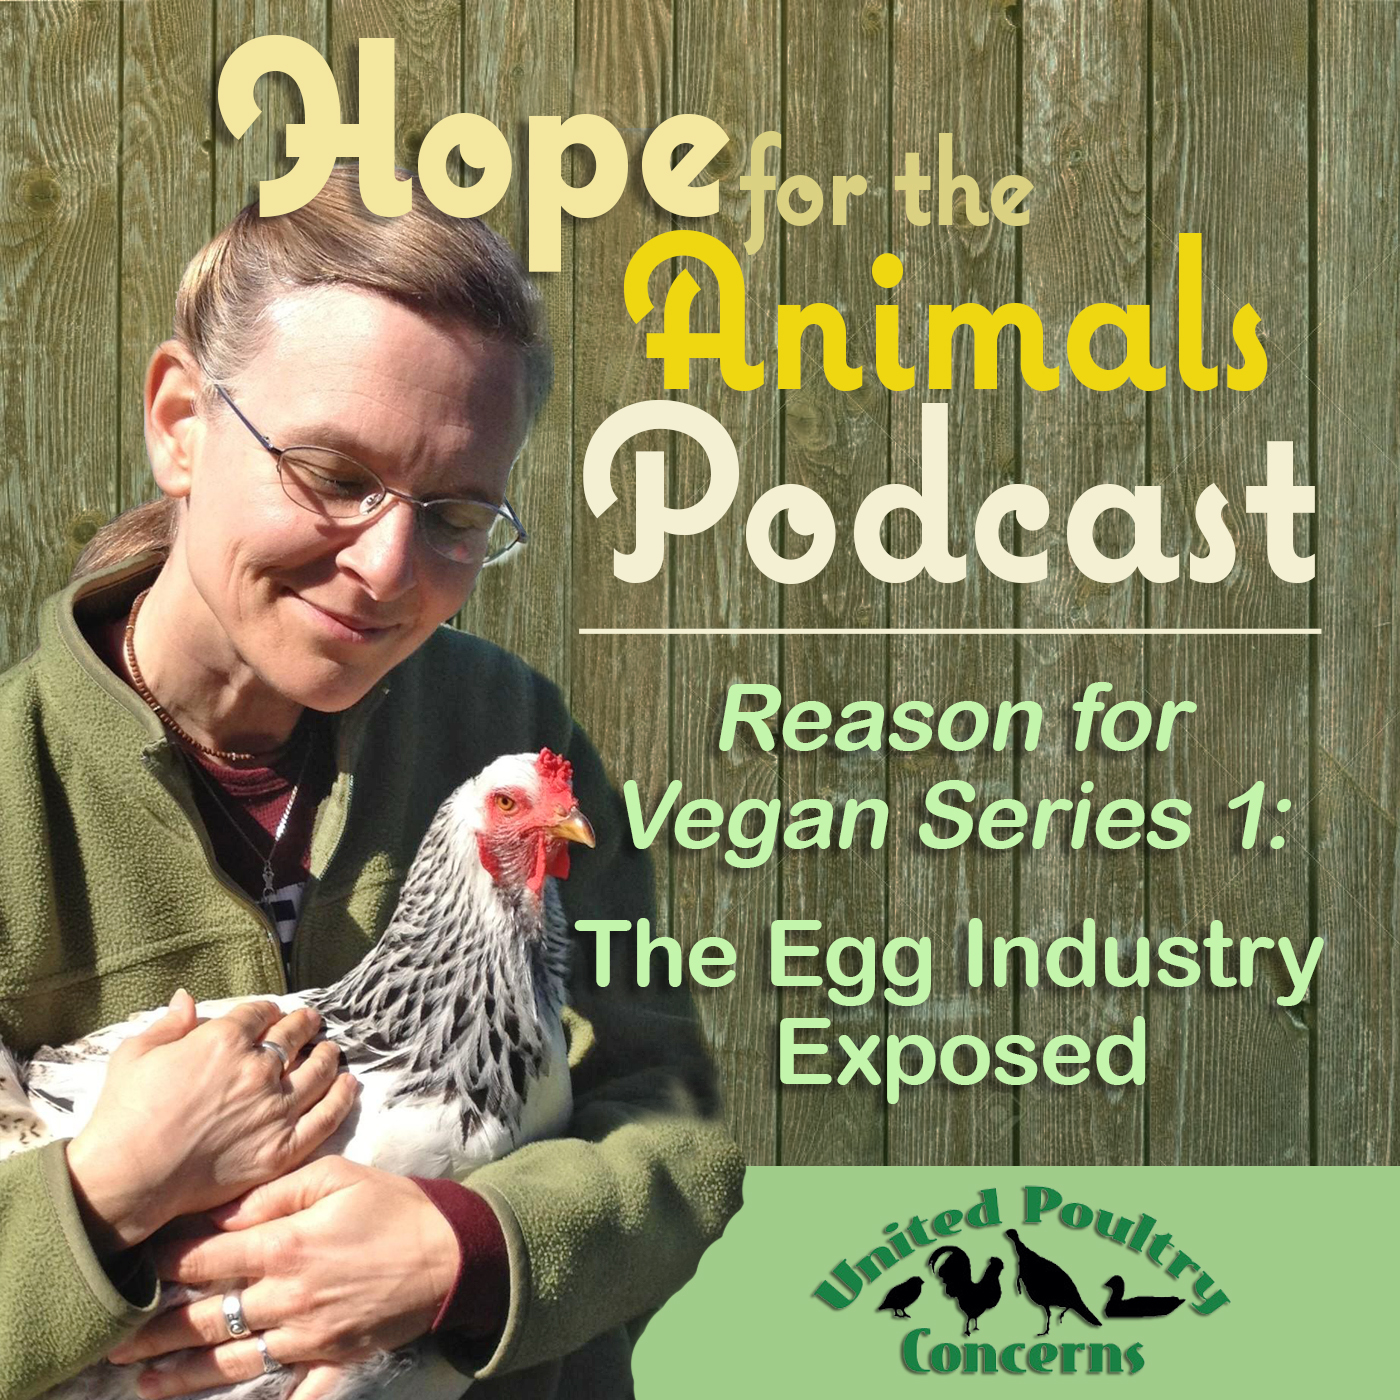 Reason for Vegan Series 1: The Egg Industry Exposed